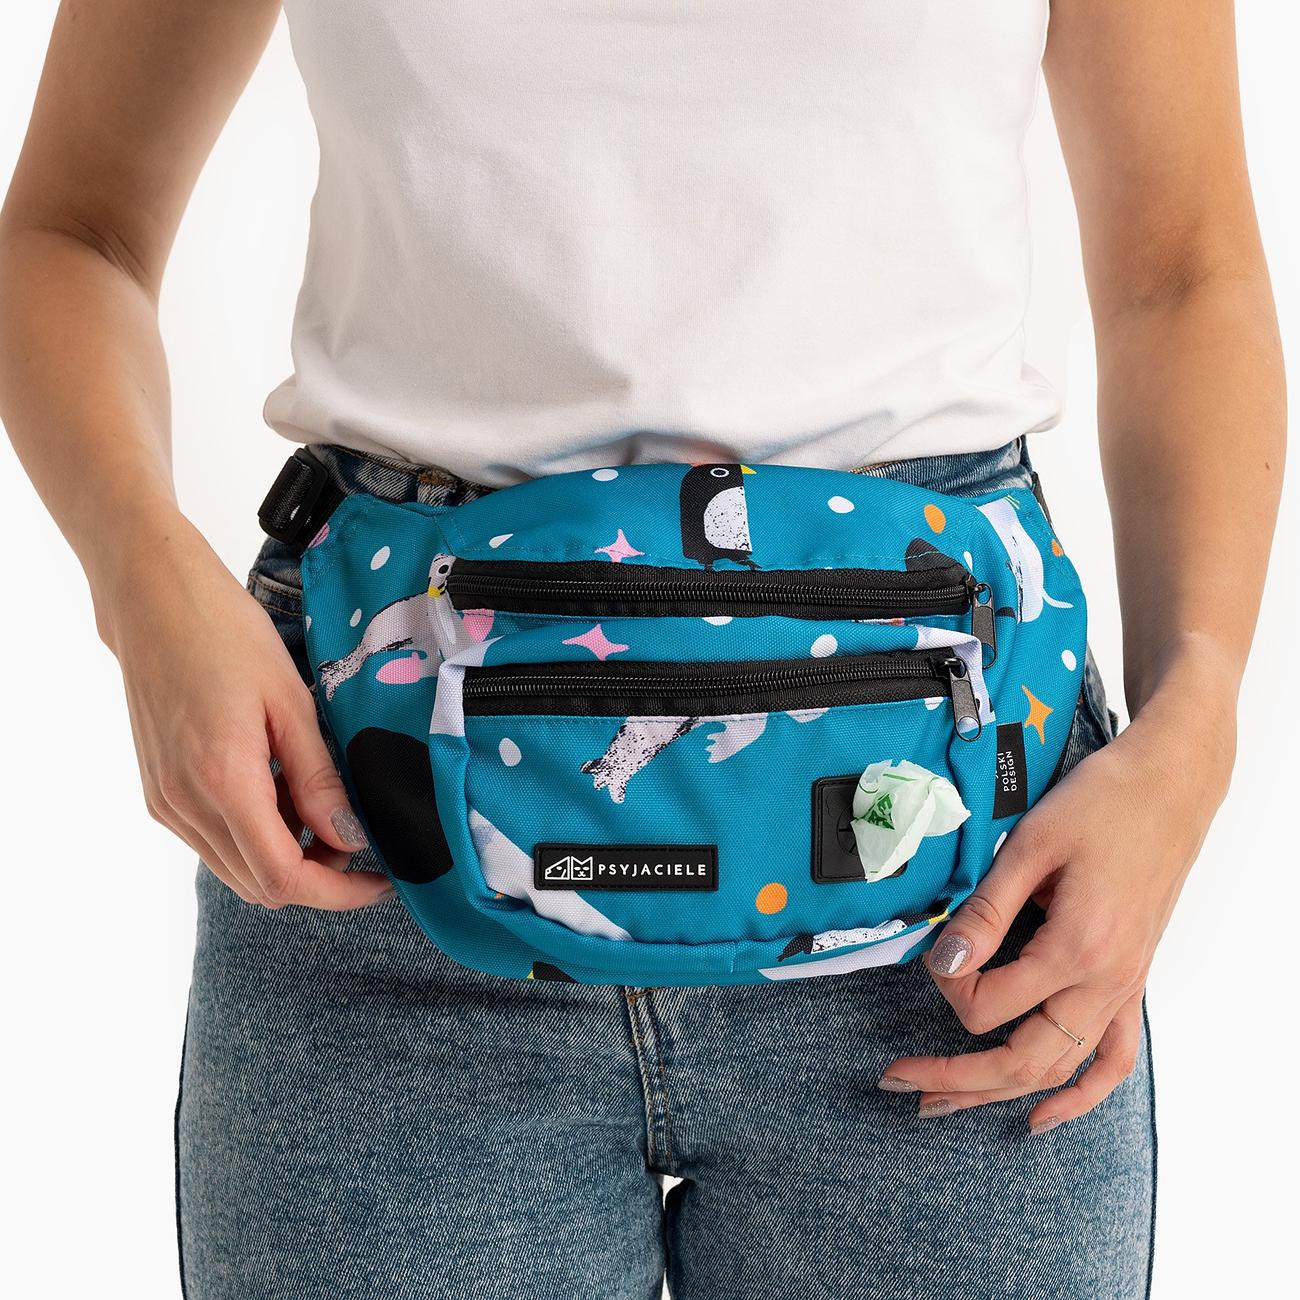 Fanny pack "What does the seal say?"